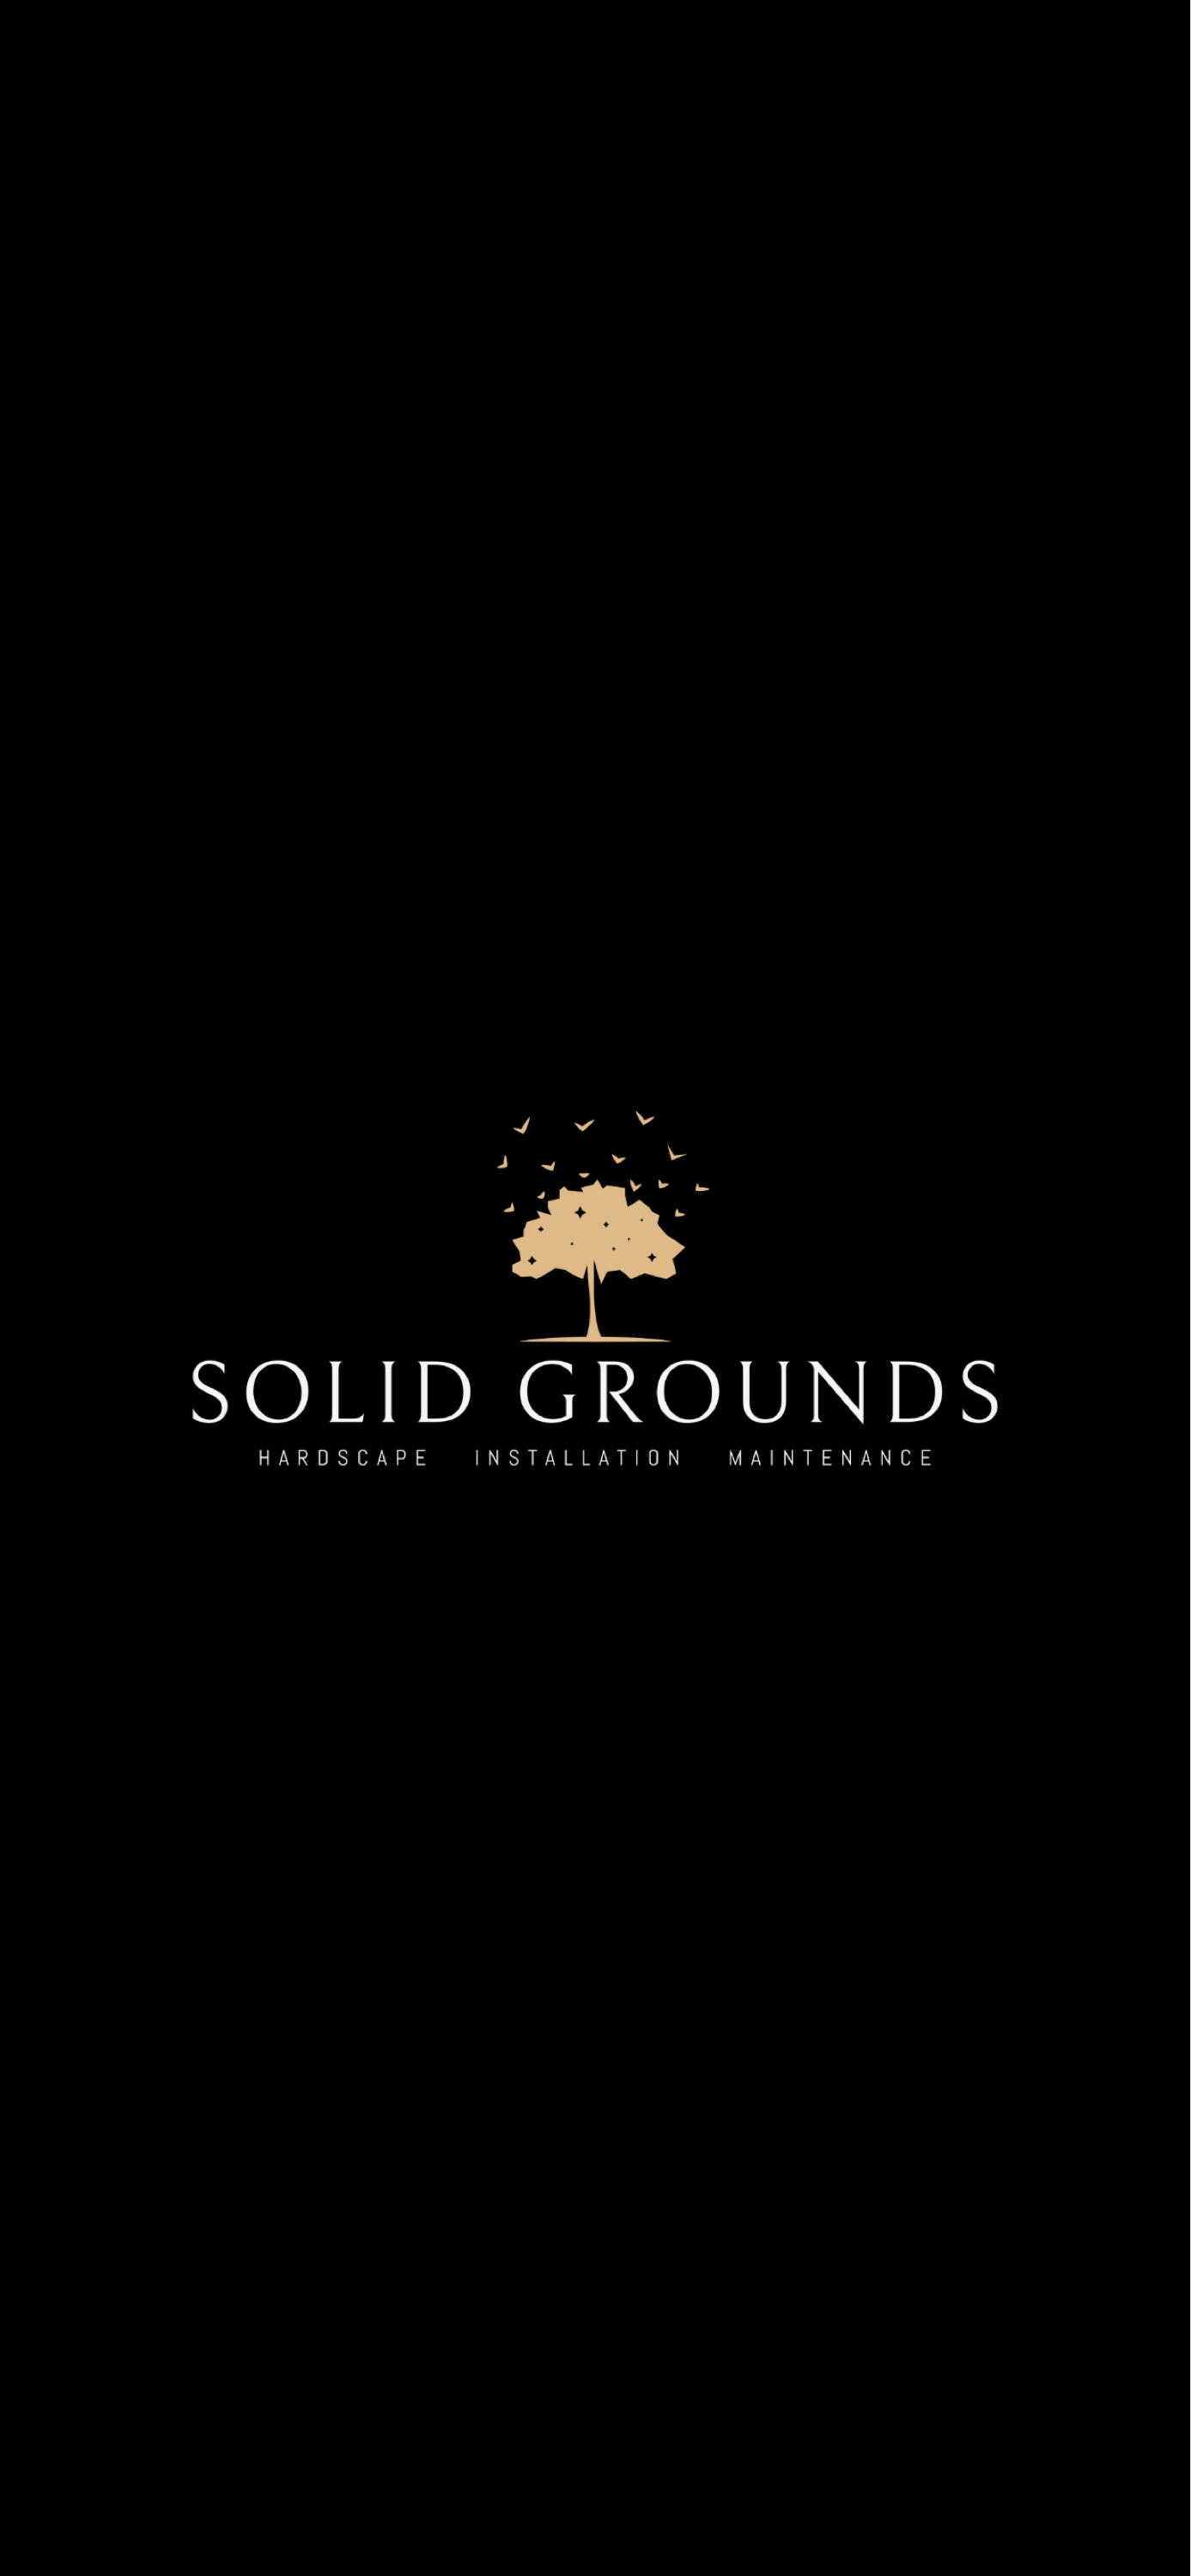 Solid Grounds Landscaping Logo